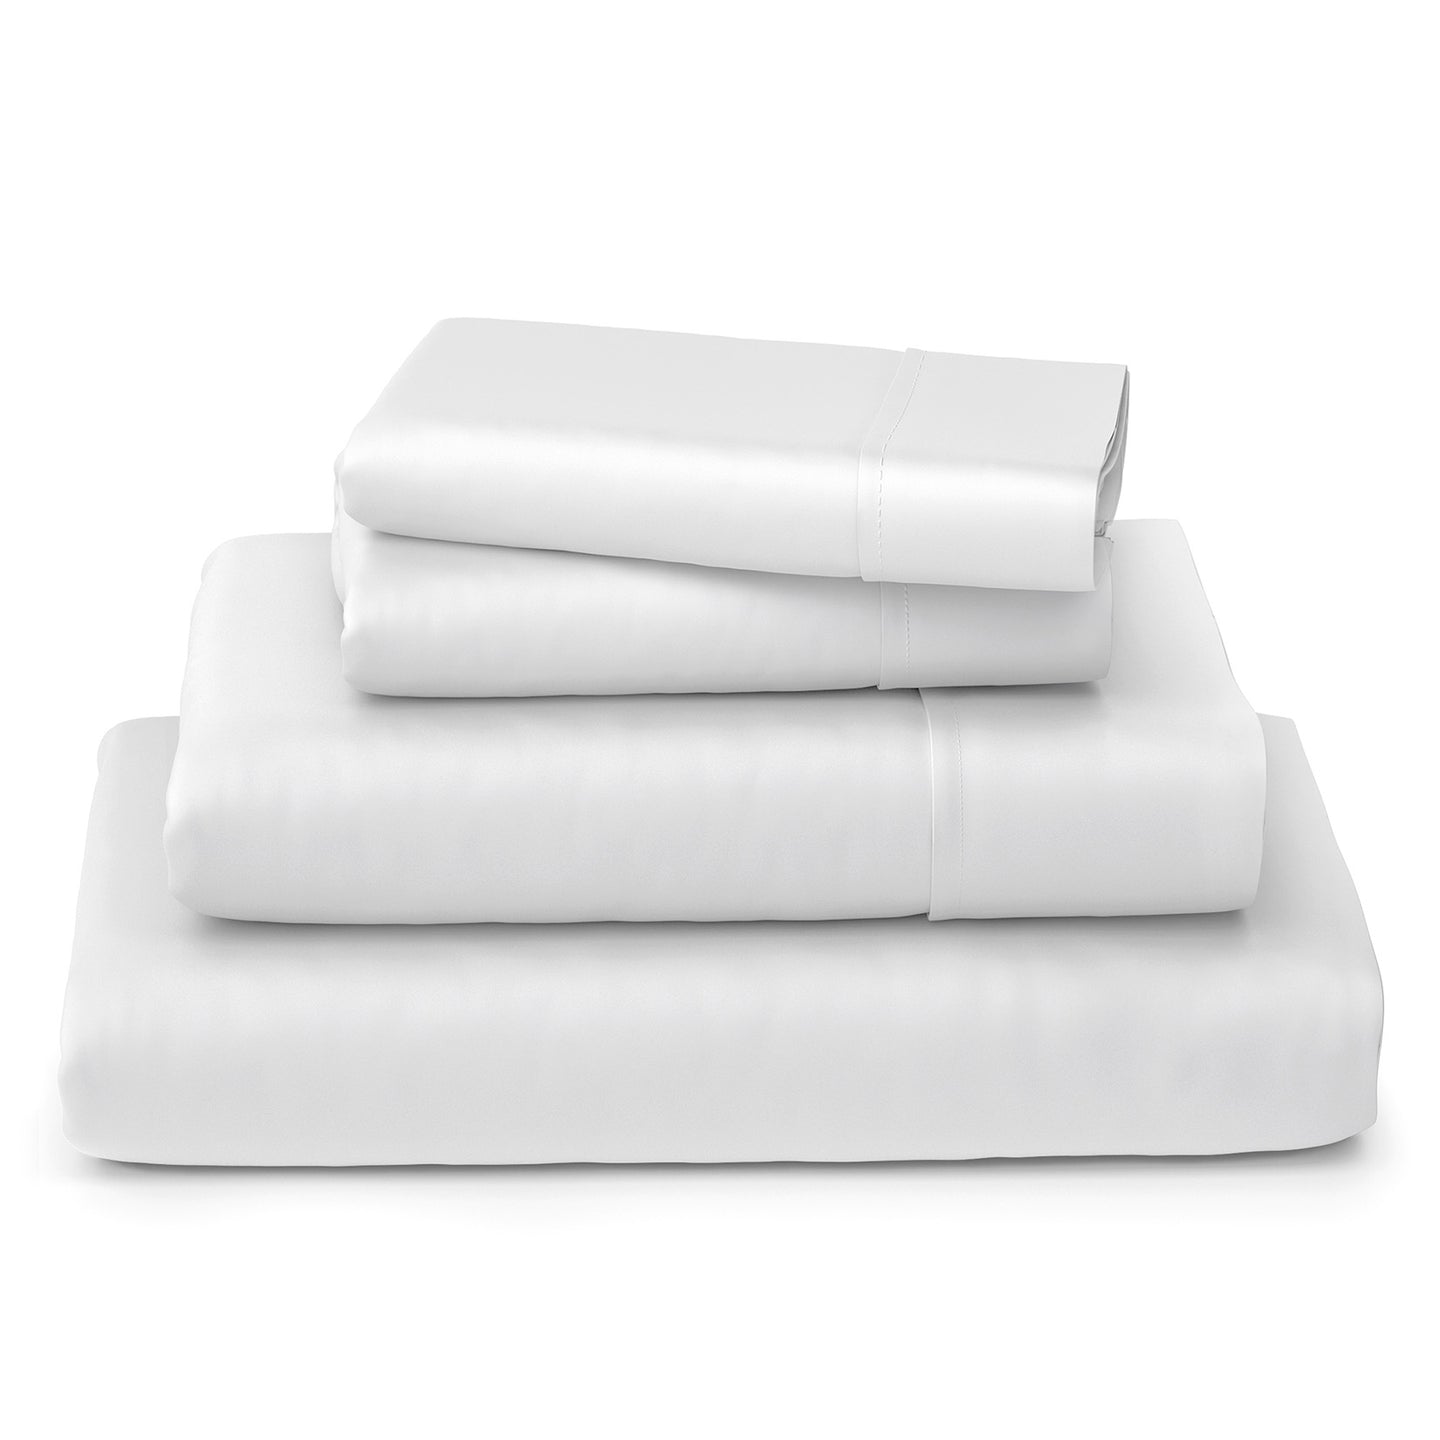 Cosy House Collection Luxury Bamboo Sheets - 4 Piece Bedding Set Queen, White